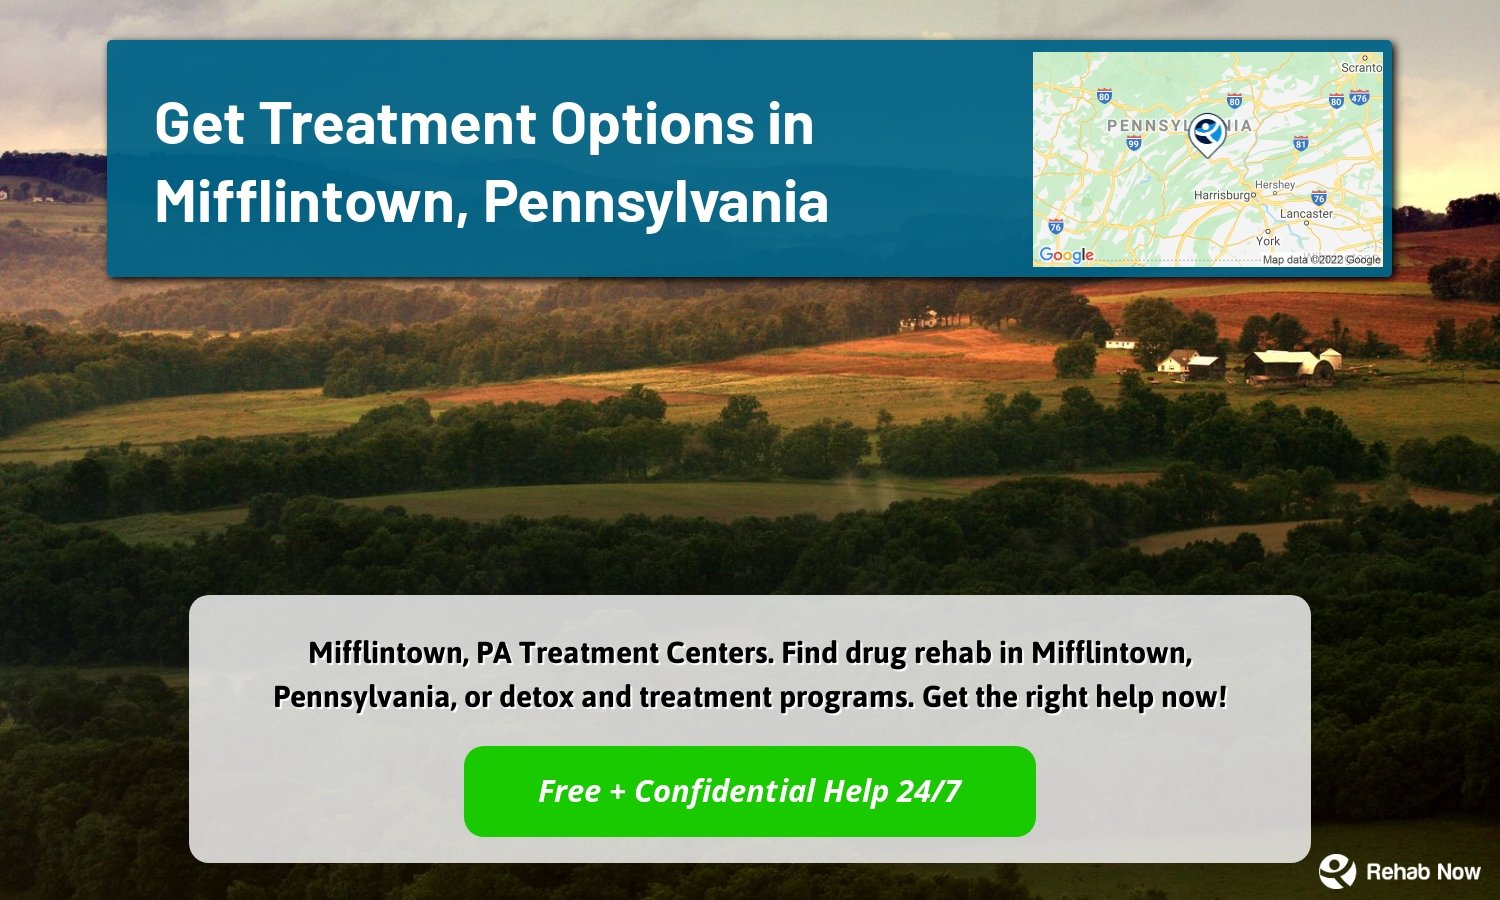 Mifflintown, PA Treatment Centers. Find drug rehab in Mifflintown, Pennsylvania, or detox and treatment programs. Get the right help now!